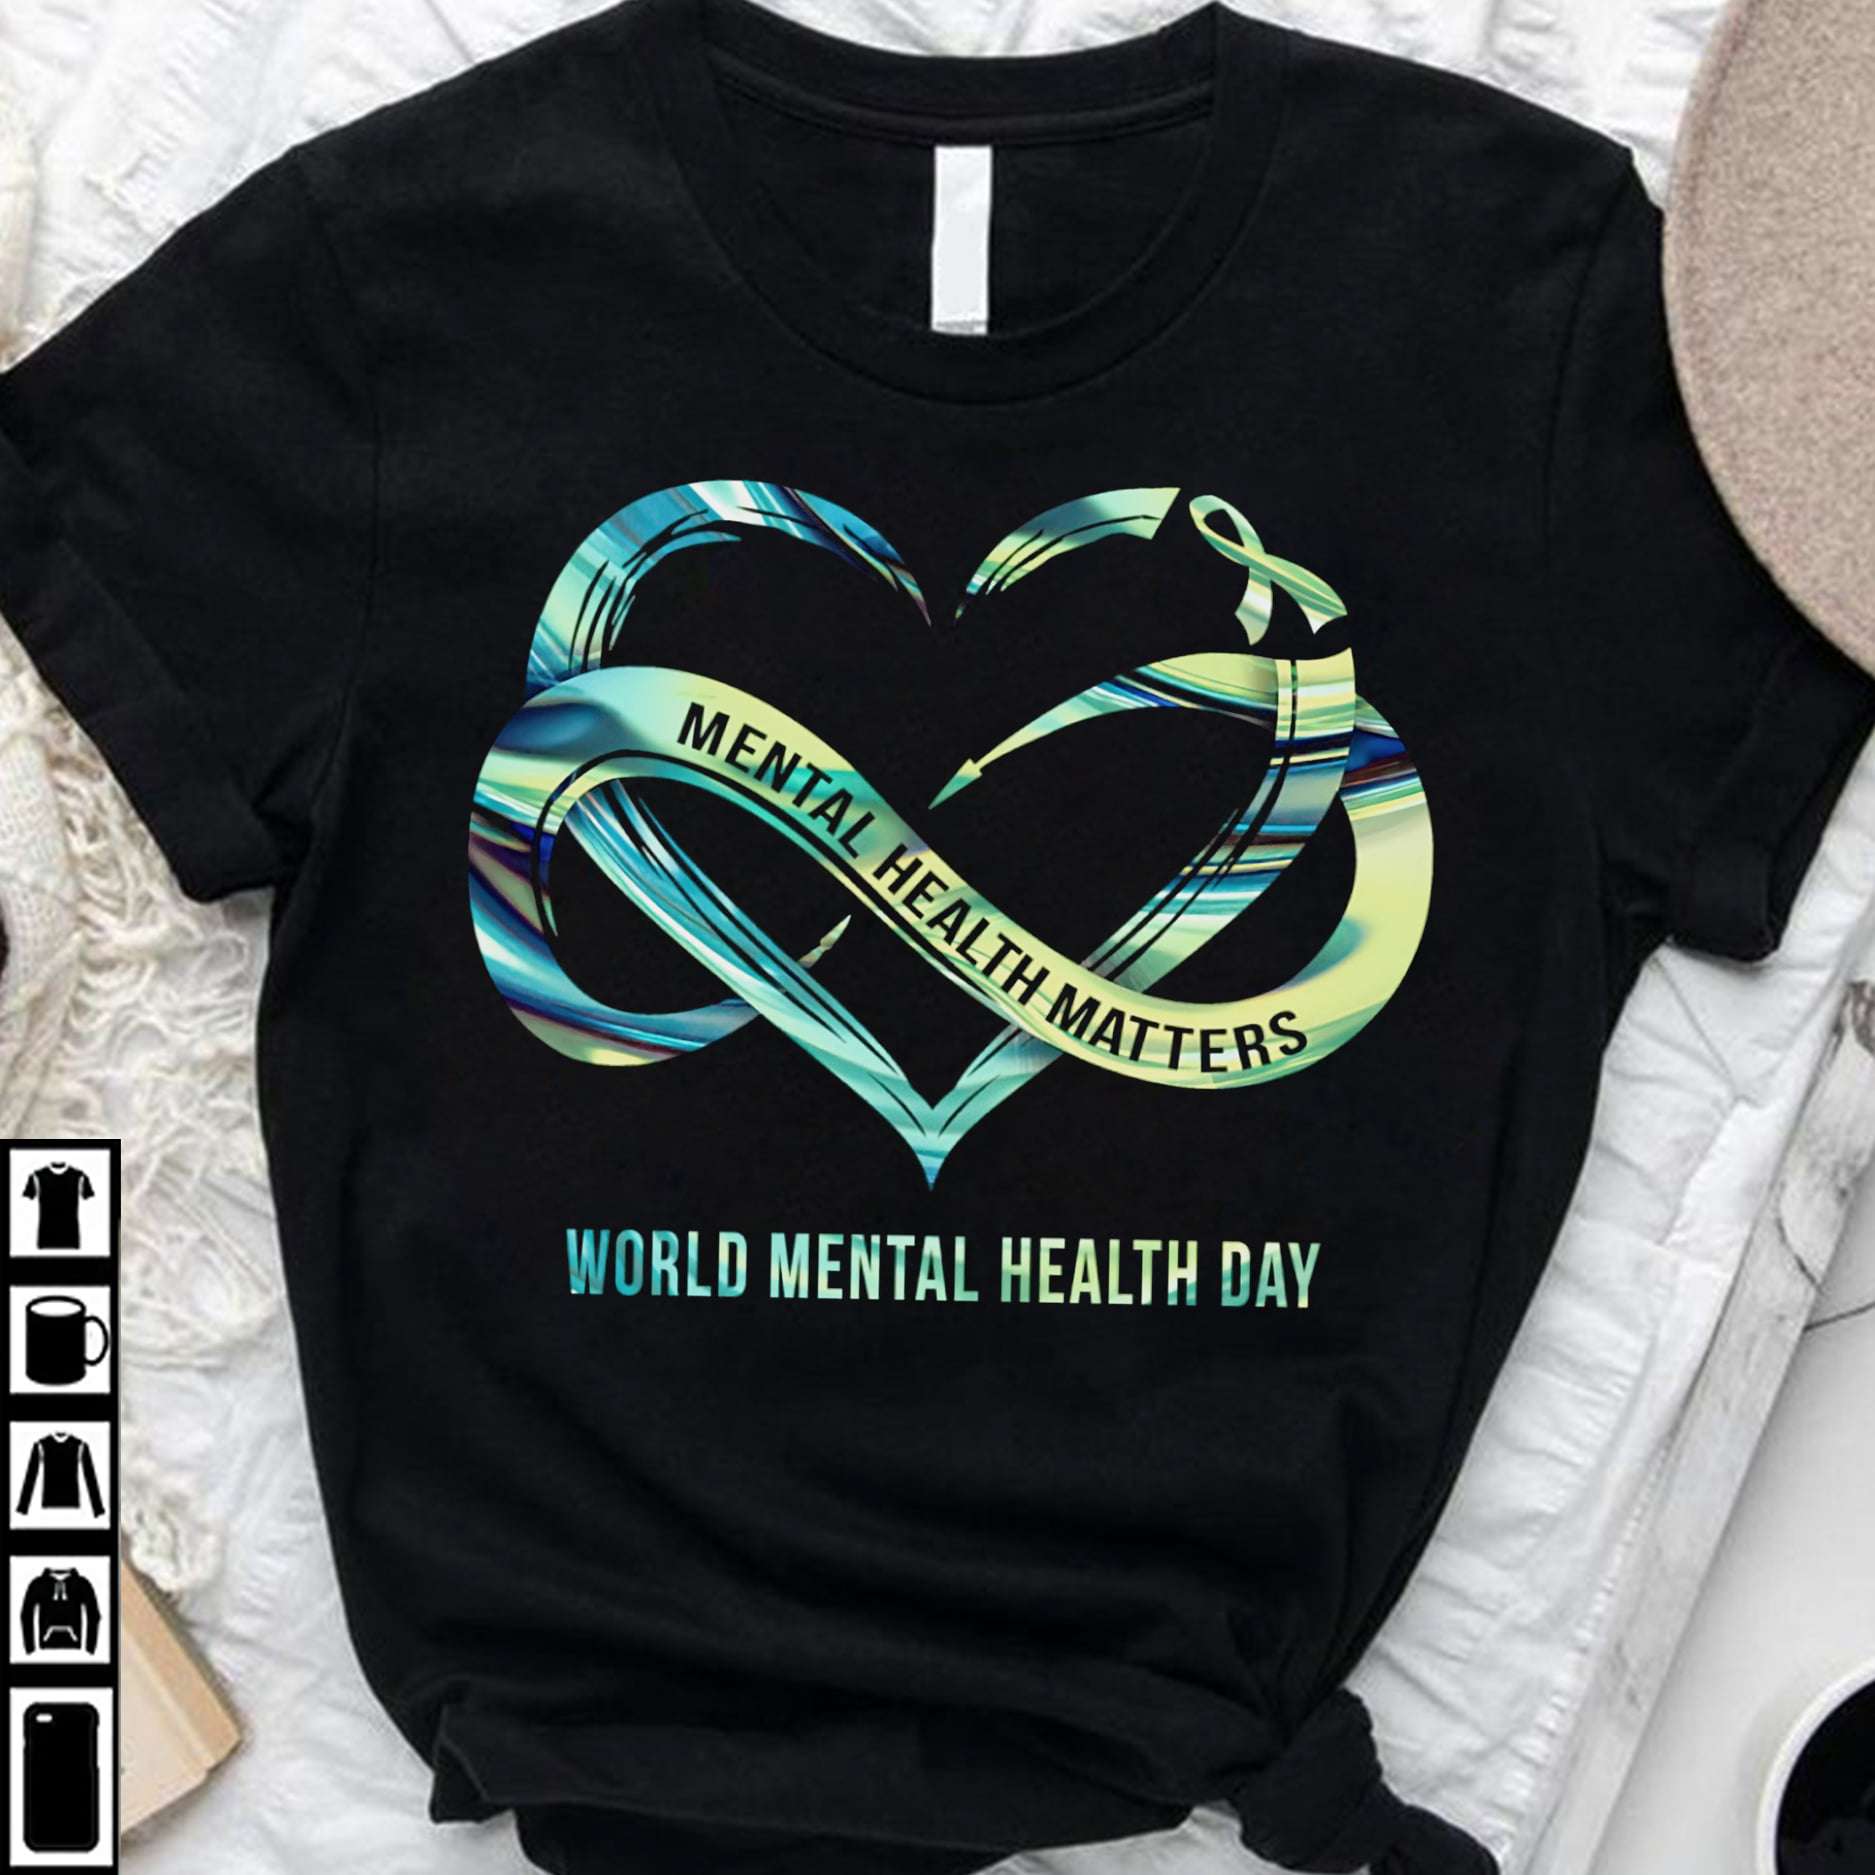 Mental health matters - World mental health day, October 10th